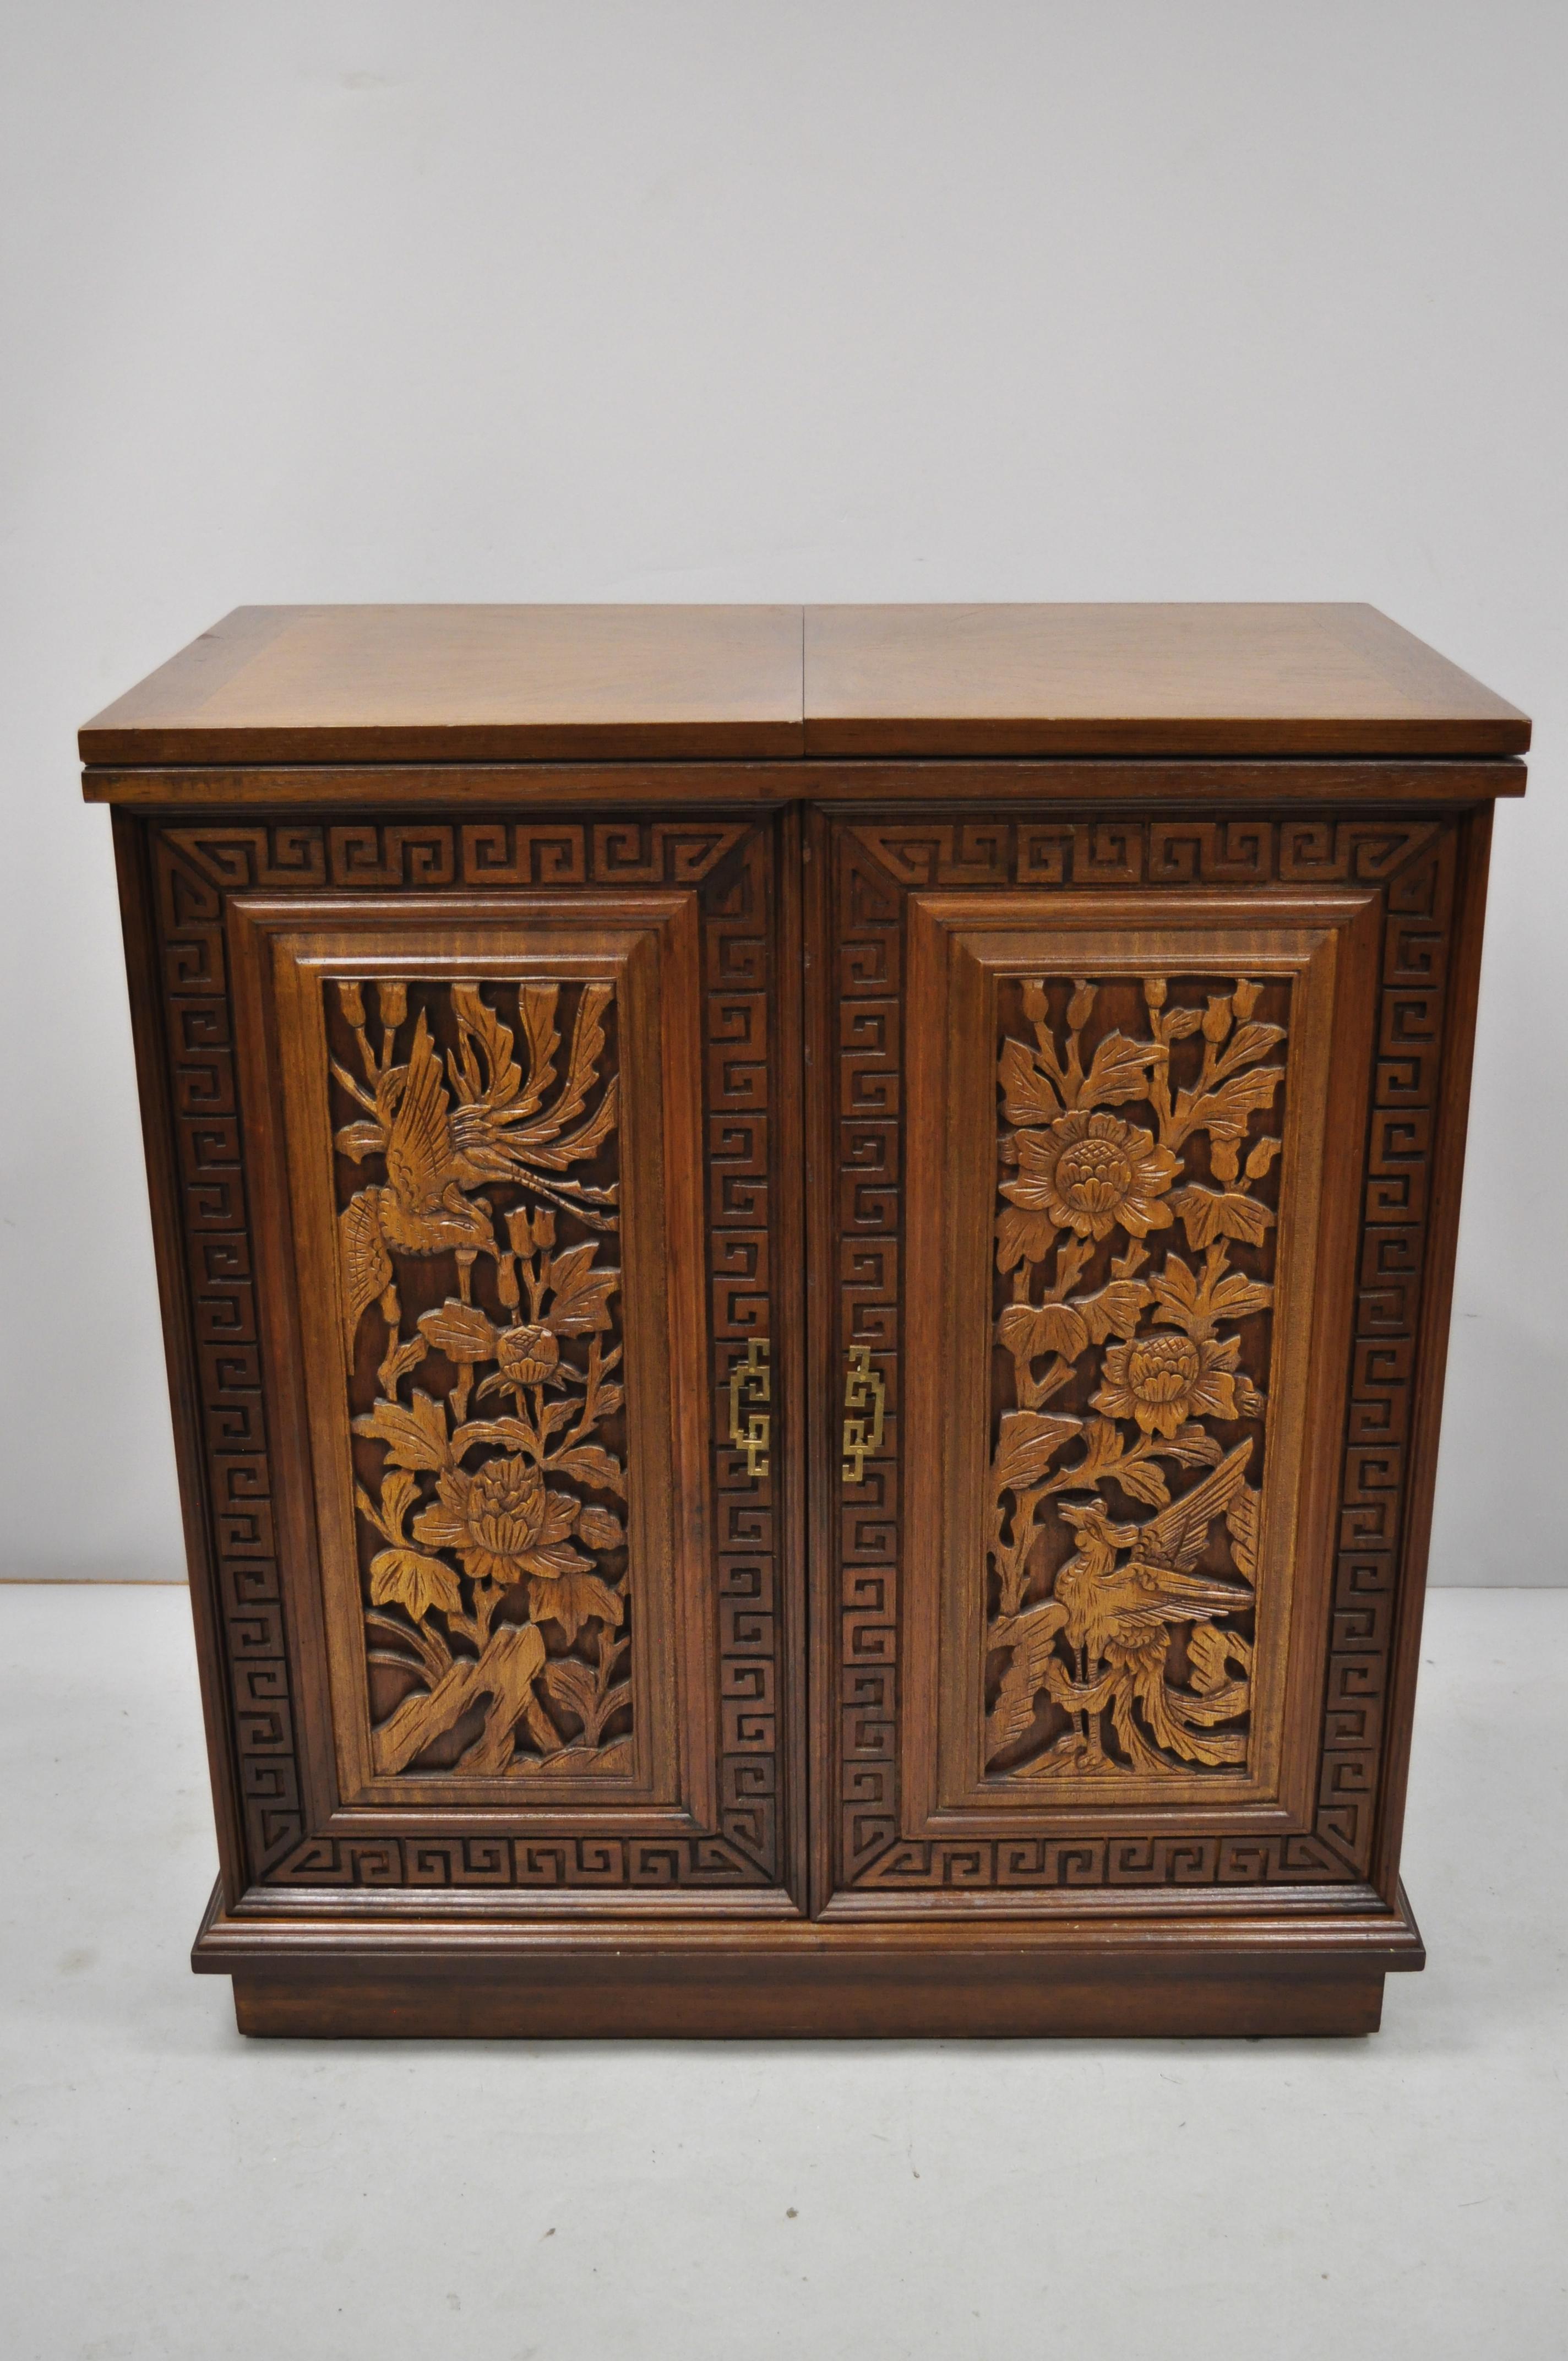 Vintage carved Chinese oriental folding expandable bar liquor cabinet server. Item includes sunburst flip top, green inset marble, fully opens to impressive surface, phoenix and flower carvings to front and back, plenty of interior storage, rolling